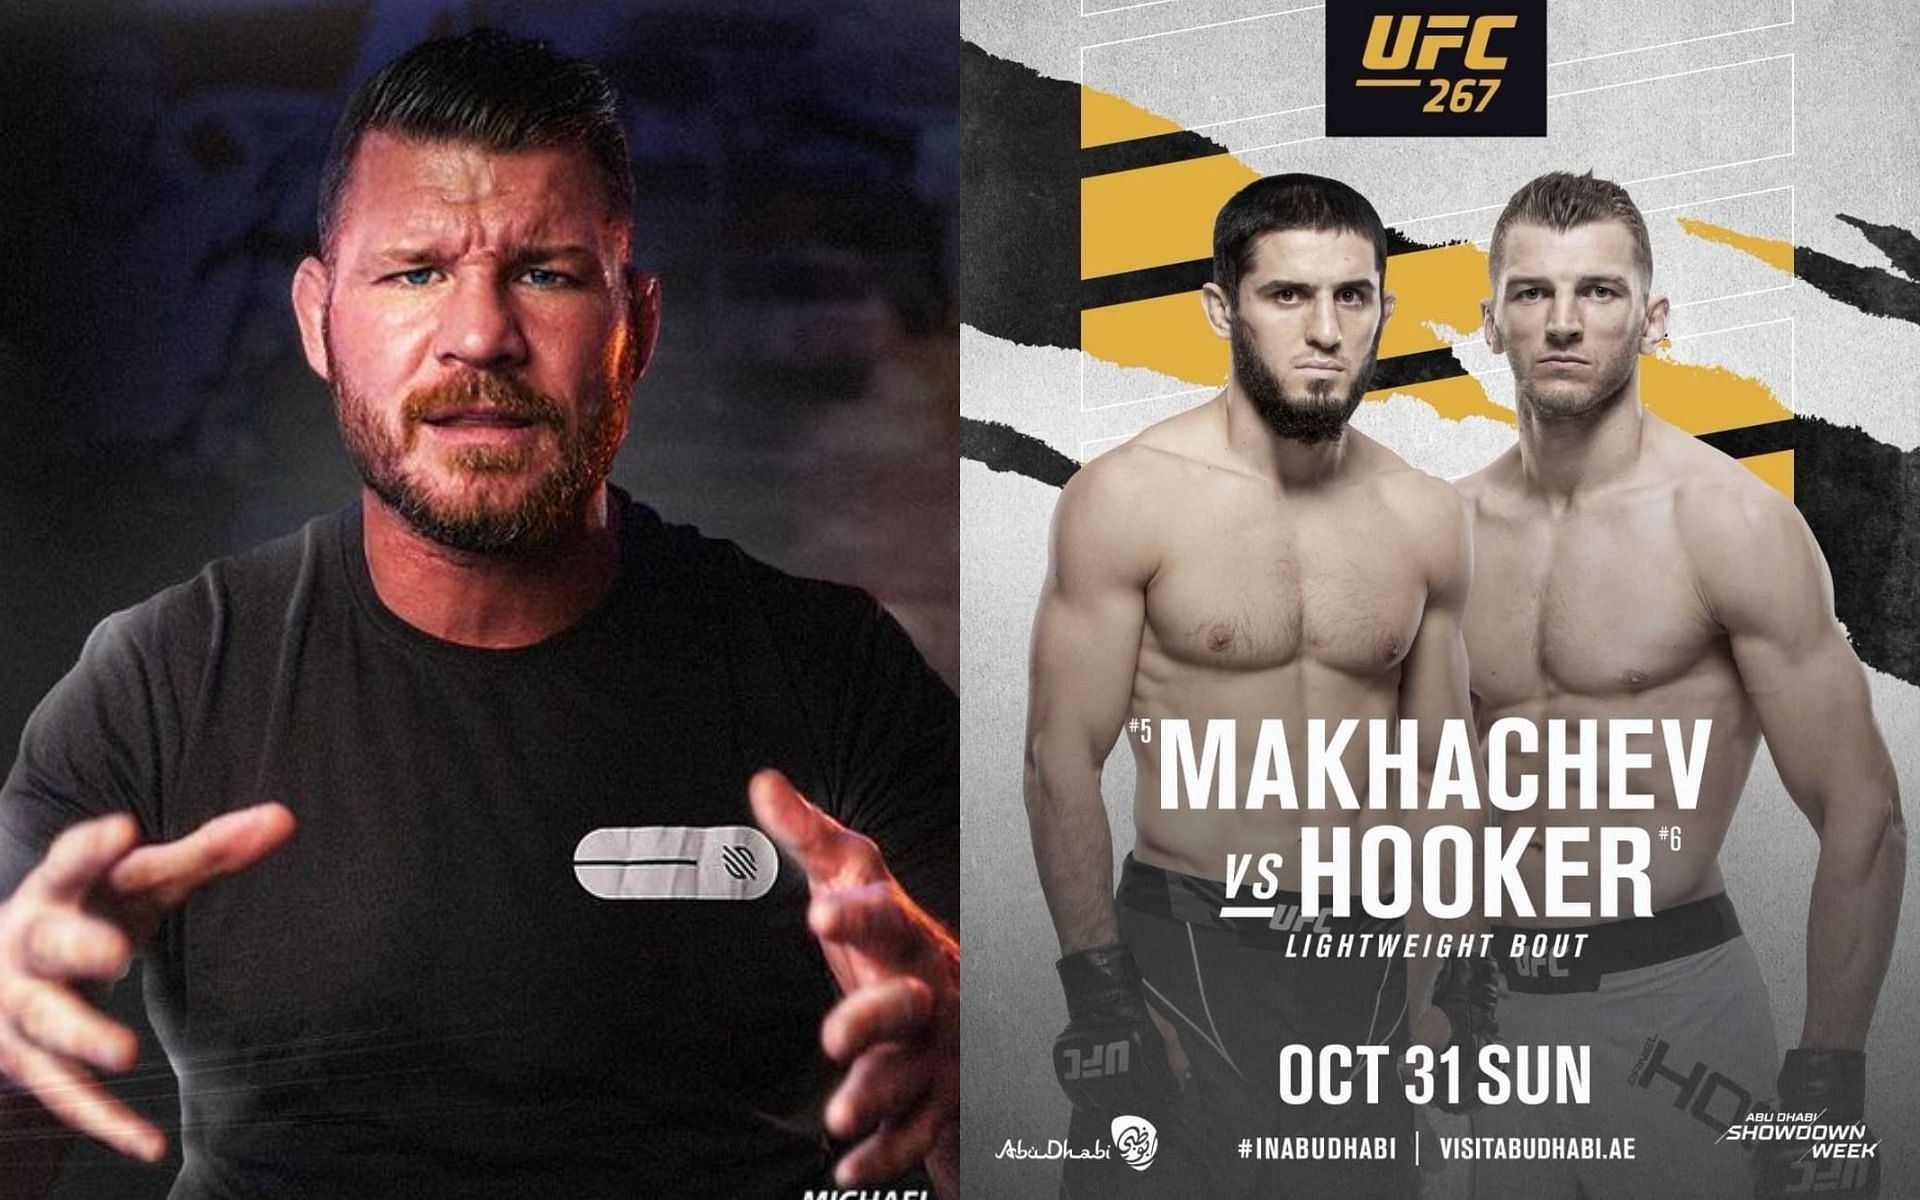 Michael Bisping (left), Dan Hooker &amp; Islam Makhachev (right) [Images Courtesy: @mikebisping @danhangman on Instagram]